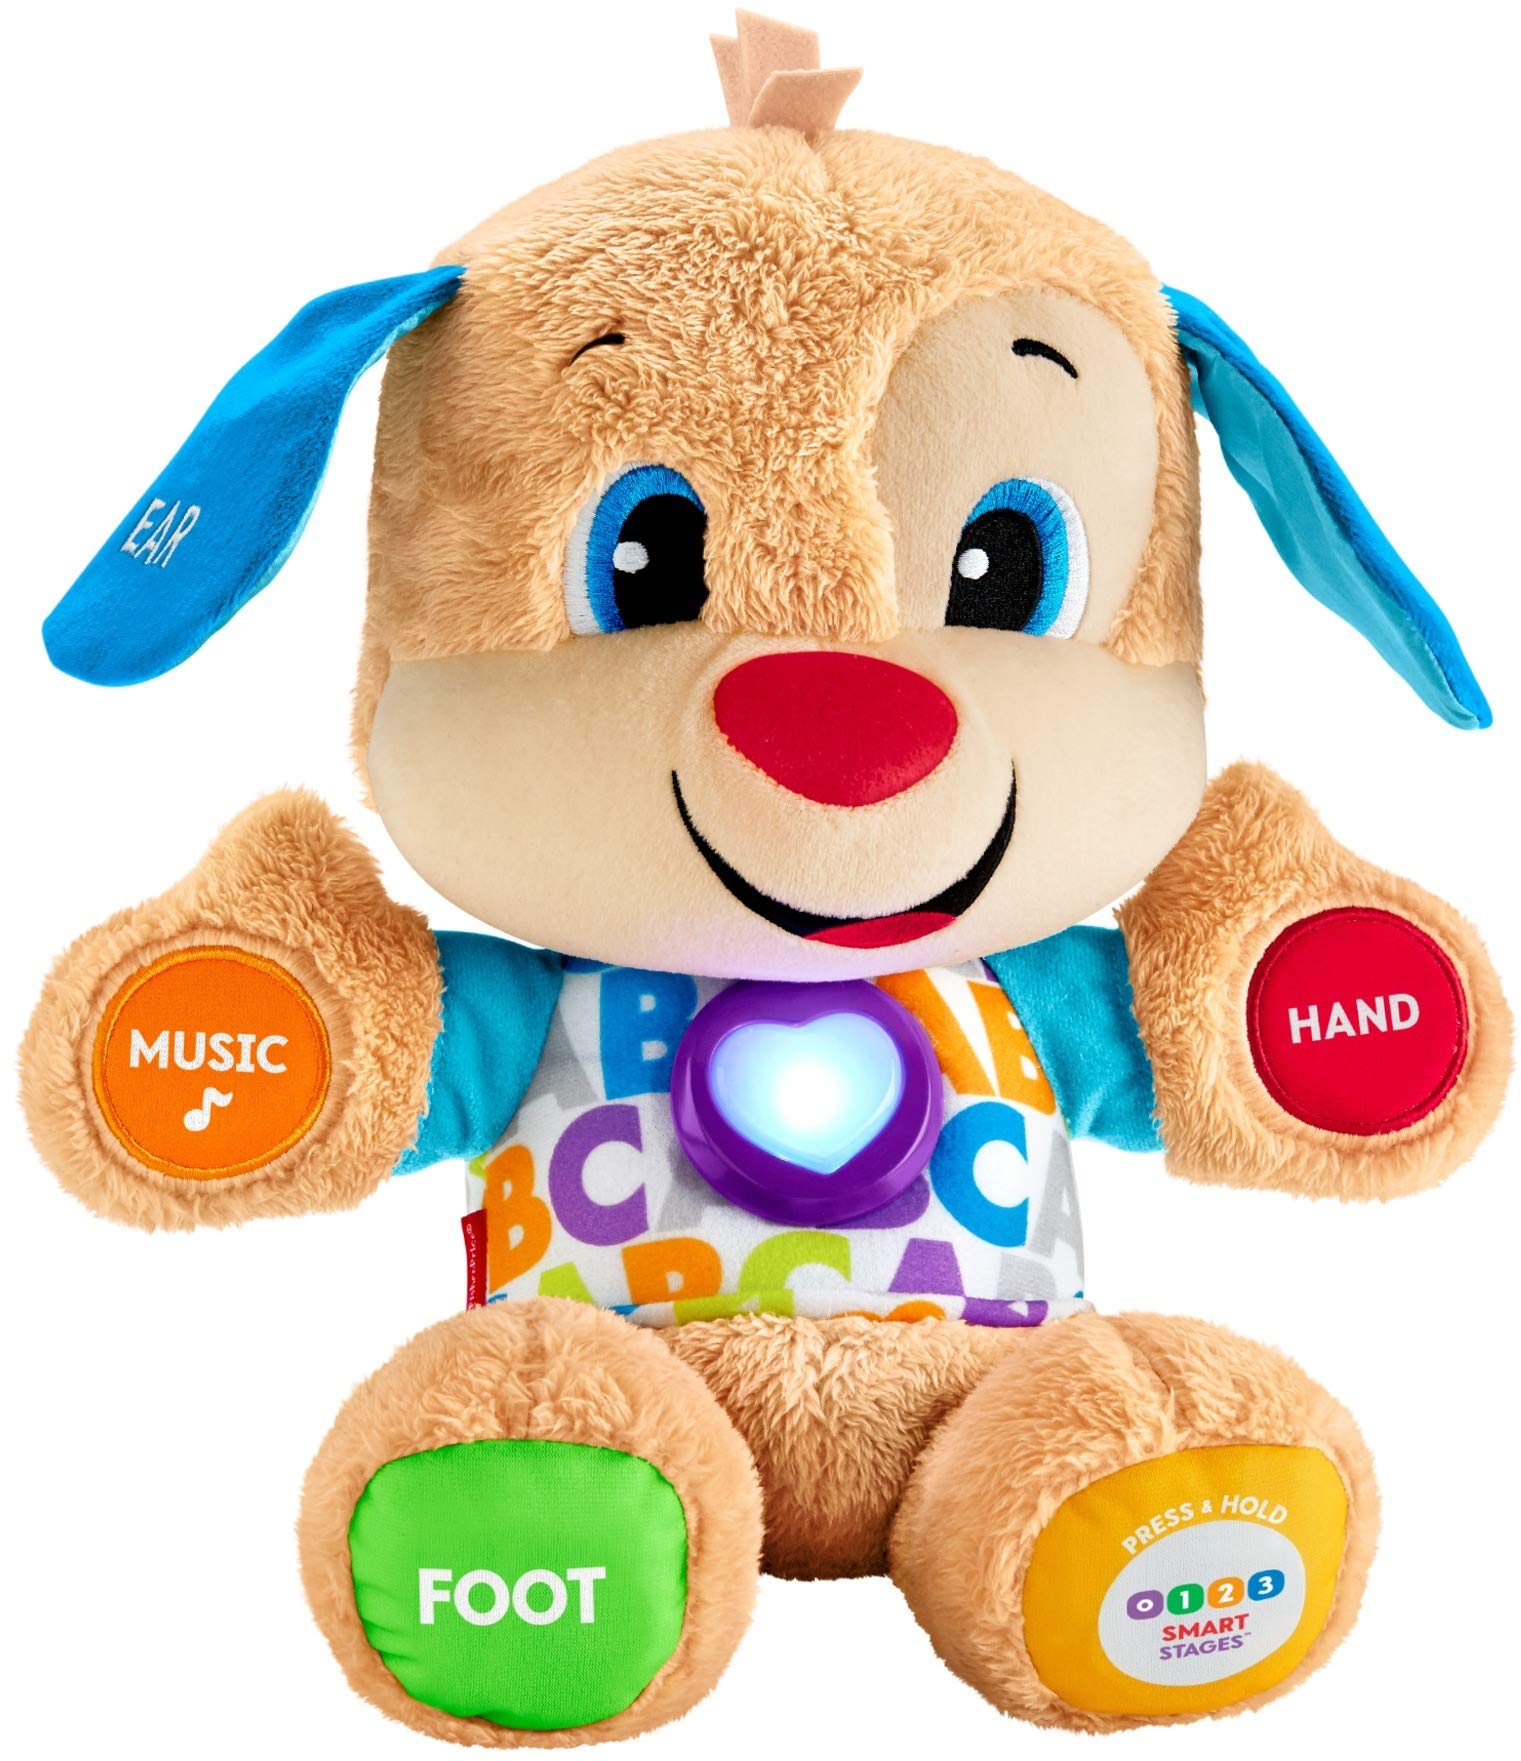 Fisher-Price Laugh & Learn Smart Stages Puppy , Brown